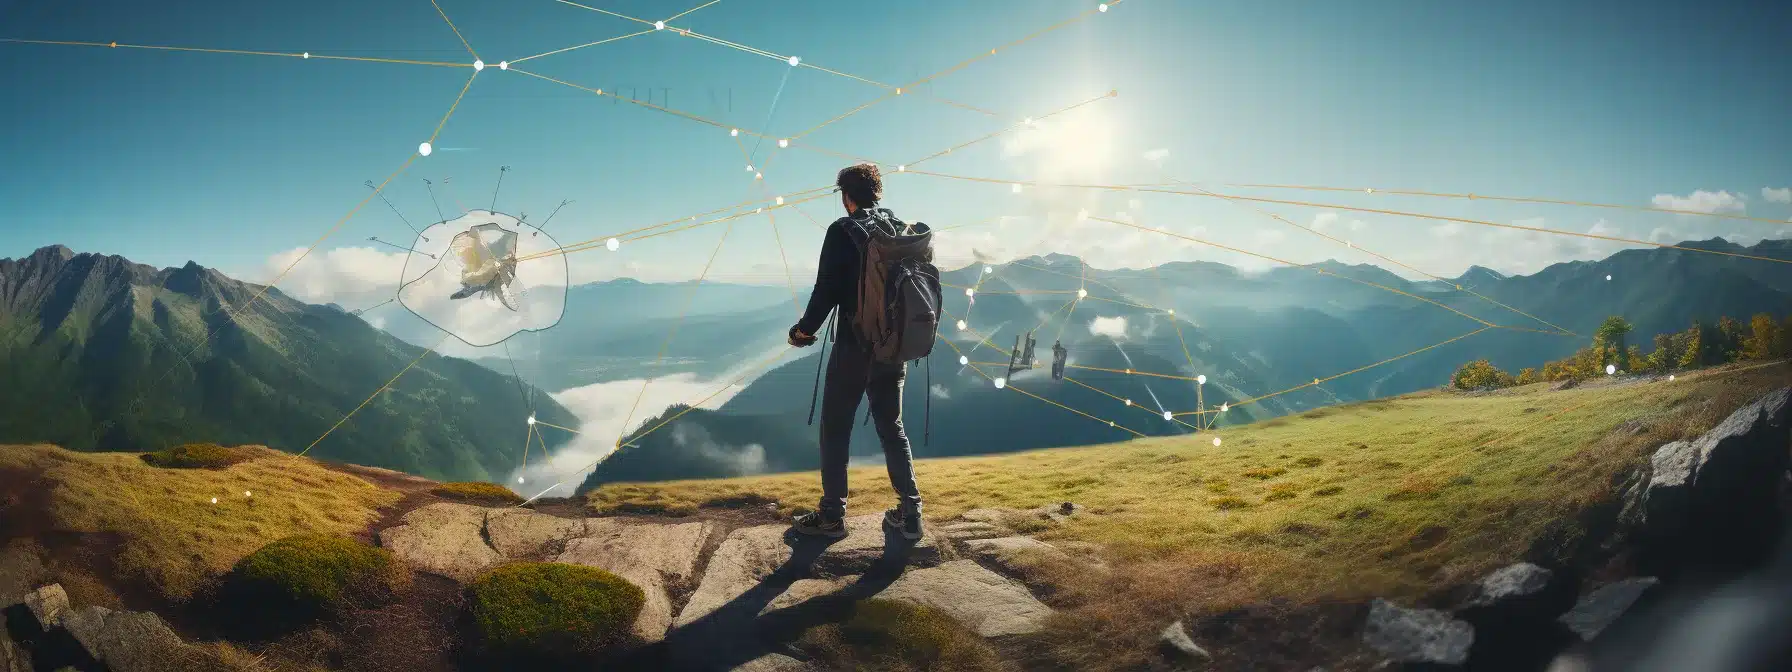 A Person Carefully Balancing On A Tightrope Between Raising Brand Image And Improving Customer Experience, With A Map And Tools In Their Backpack, While Avoiding The Dangers Of Anonymity.